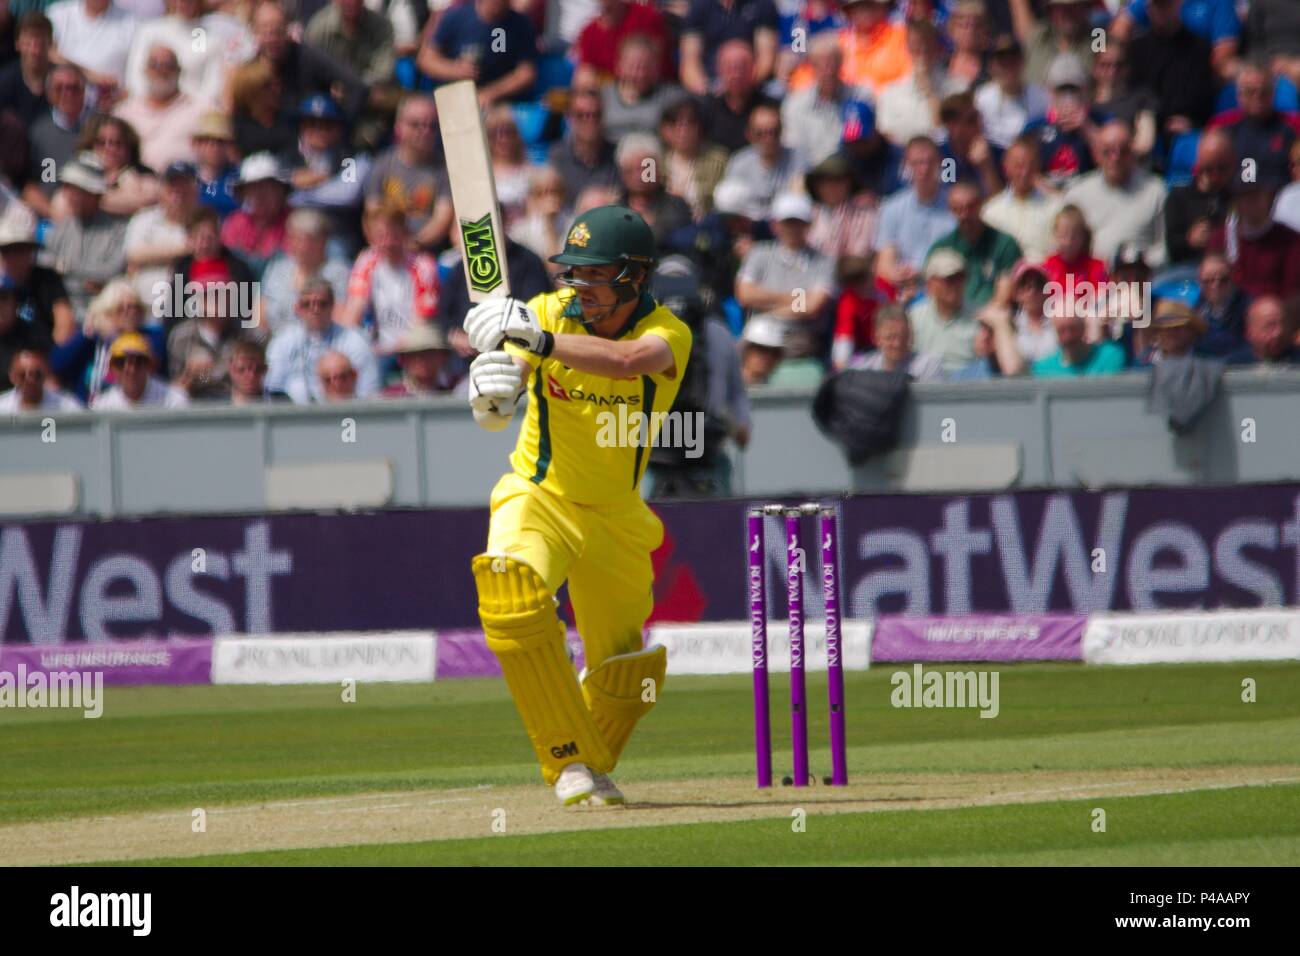 Chester-le-Street, England 21 June 2018. Travis Head batting for Australia against England in the fourth ODI at the Emirates Riverside. Credit: Colin Edwards/Alamy Live News. Stock Photo